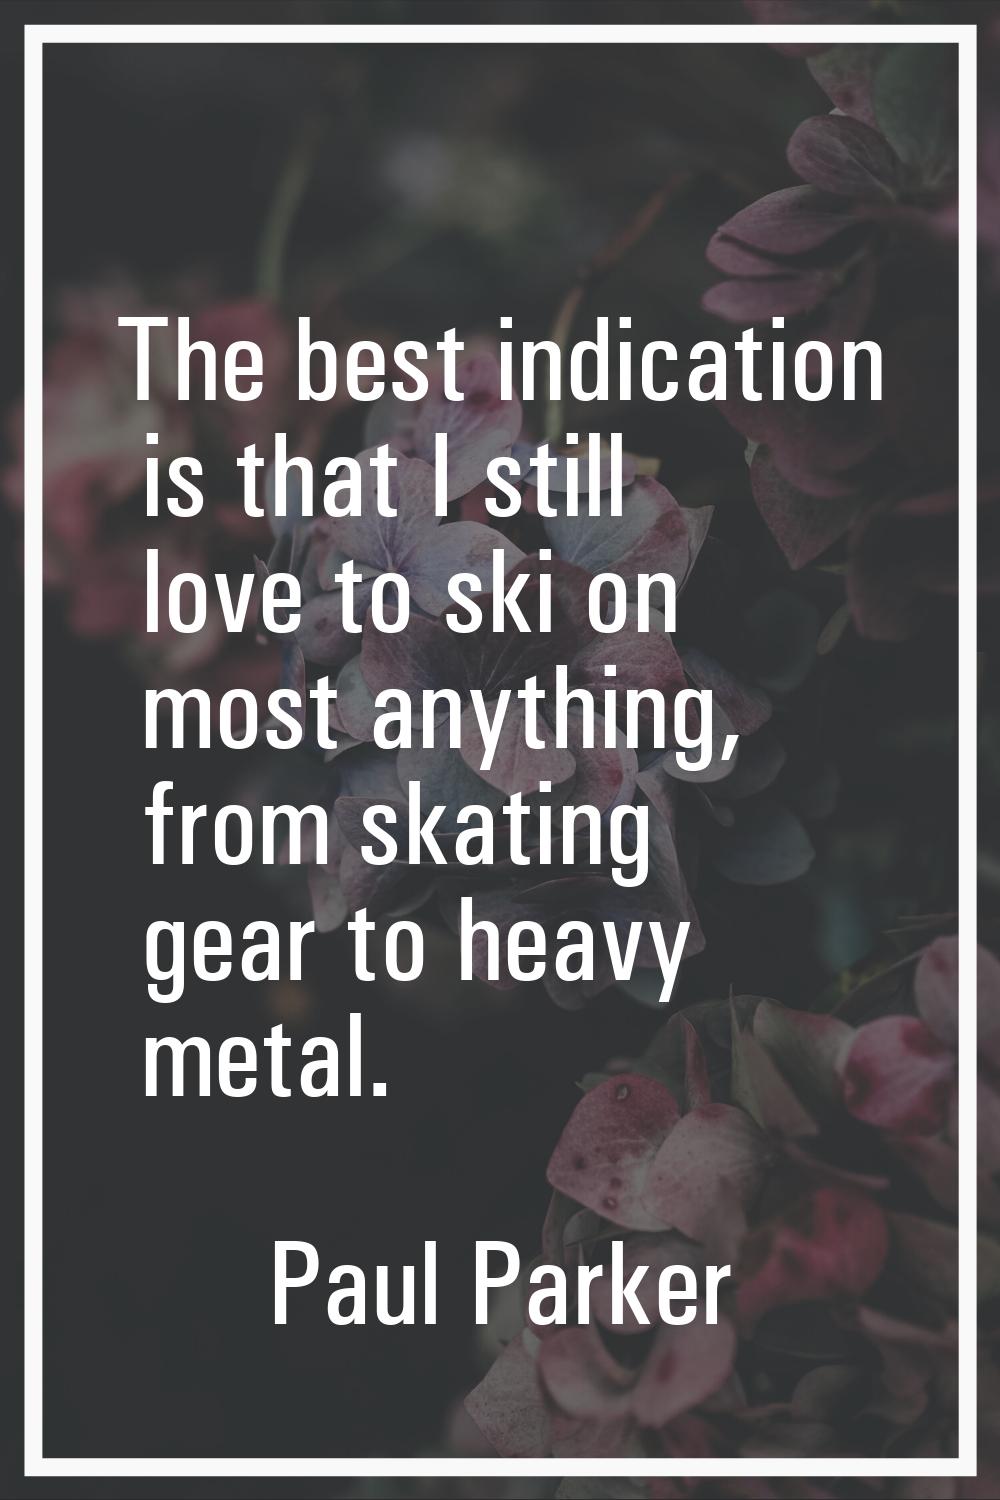 The best indication is that I still love to ski on most anything, from skating gear to heavy metal.